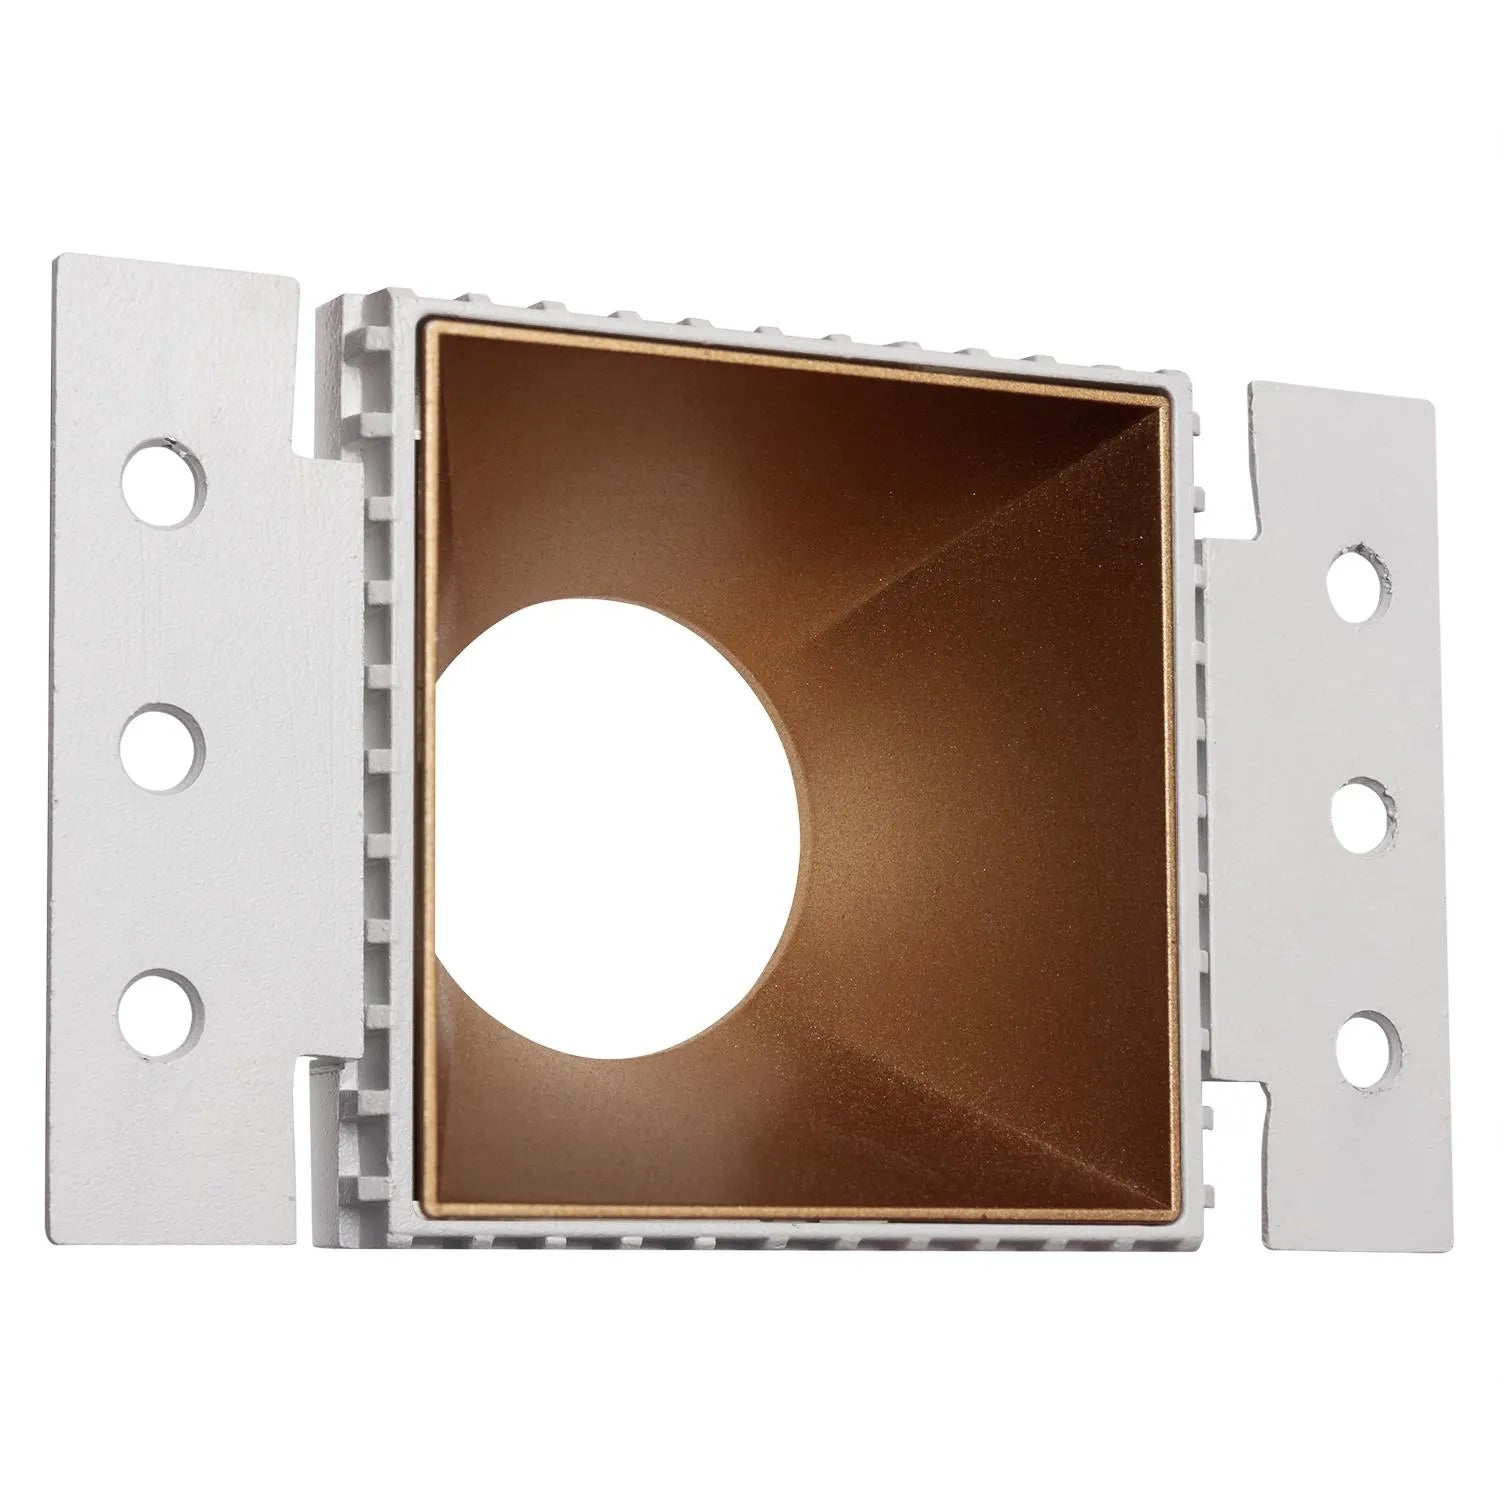 Westgate LRD-TL-10W-50K-4S-MG LED 4" Round Architectural Trimless Recessed Light Residential Lighting - Matte Gold